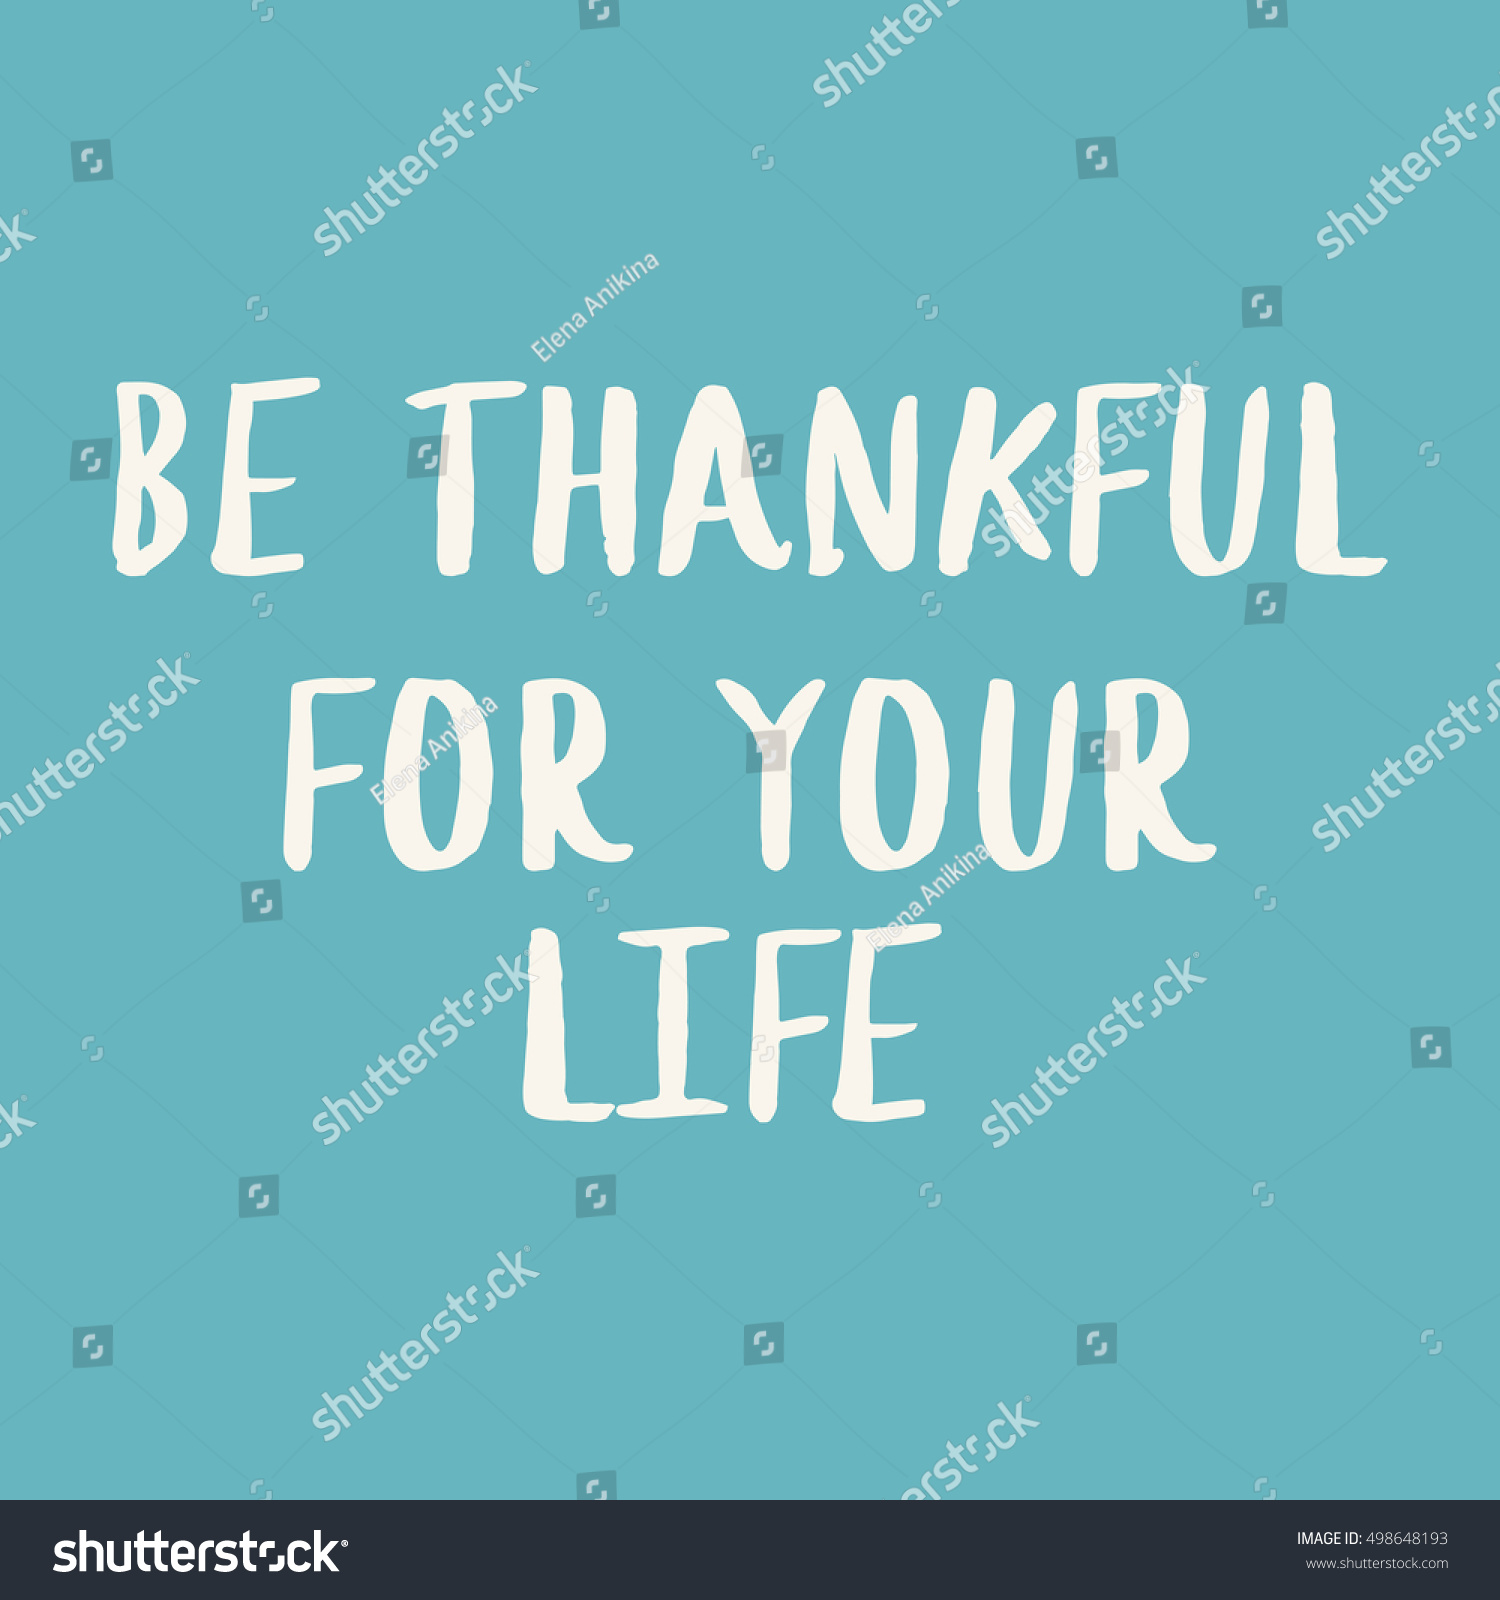 Be thankful for your life Inspirational quote card Lifestyle phrase poster Vector illustration